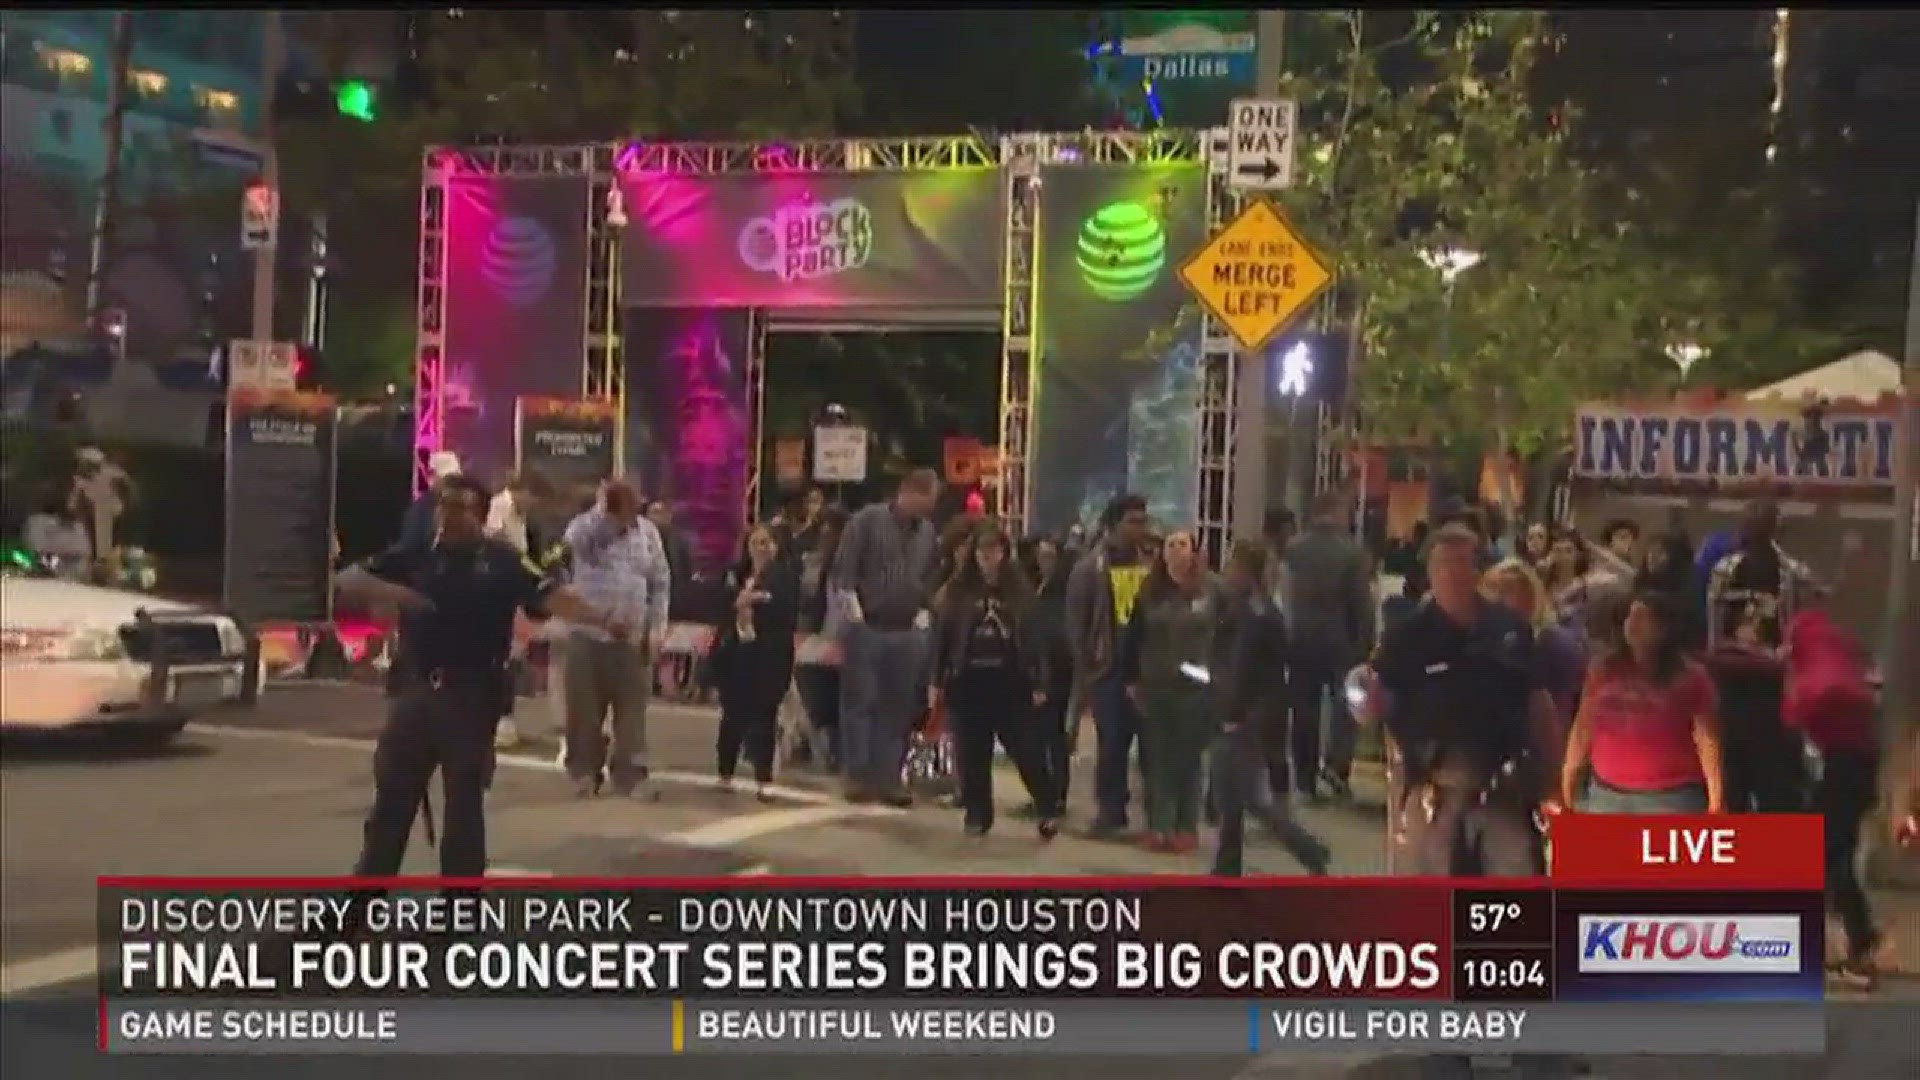 Final Four concert series brings big crowds to Discovery Green khou